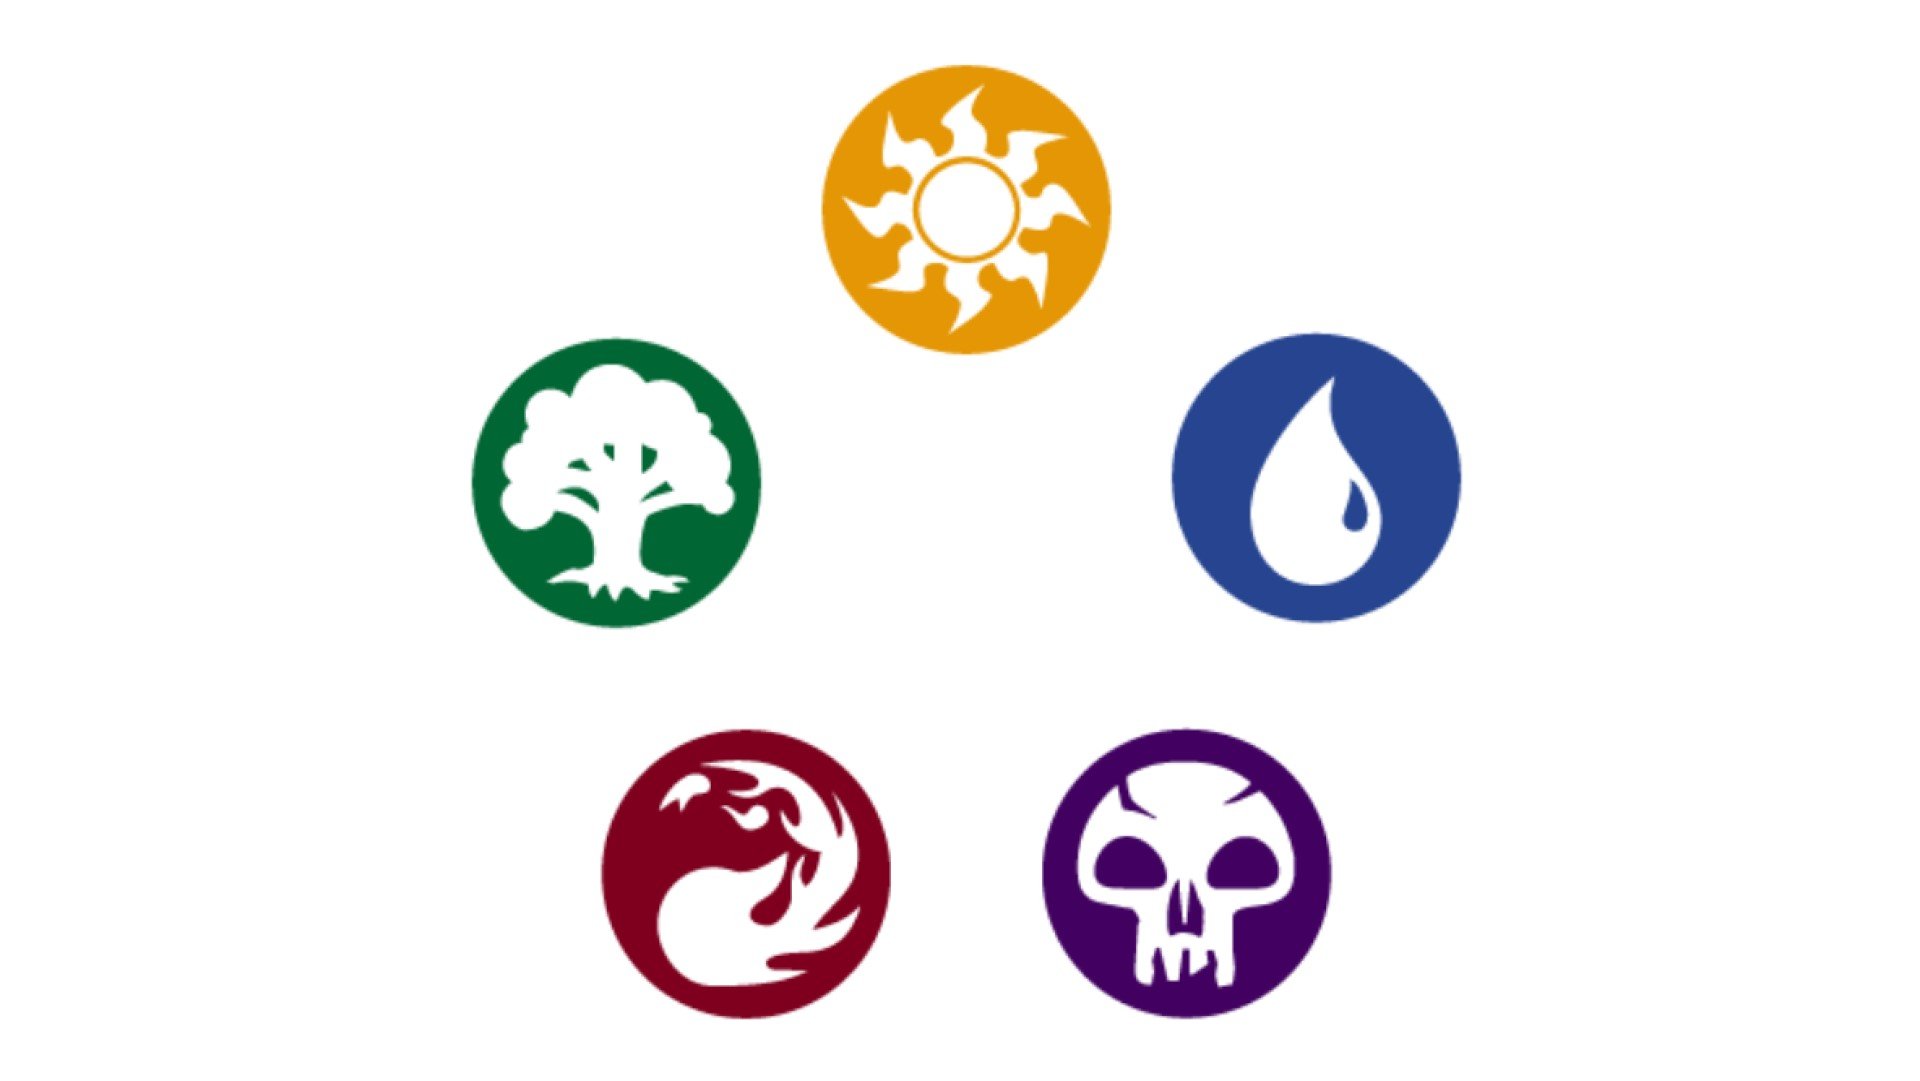 MTG color wheels symbols (image from Wizards of the Coast)